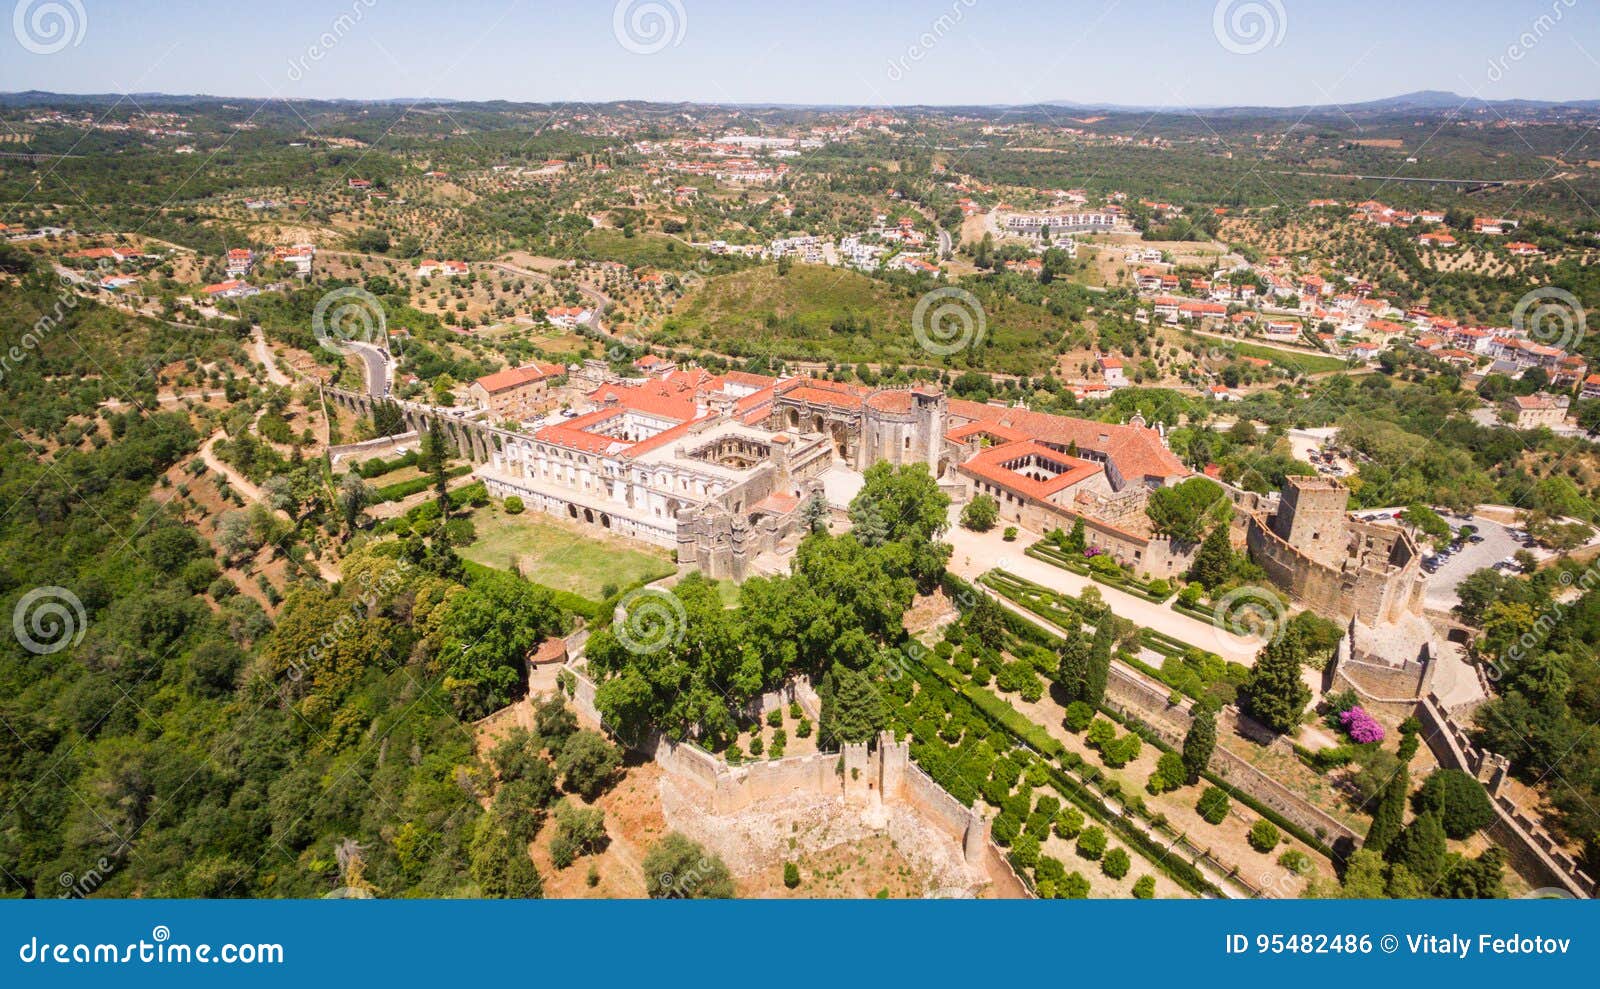 aerial view of monastery convent of christ in tomar, portugal